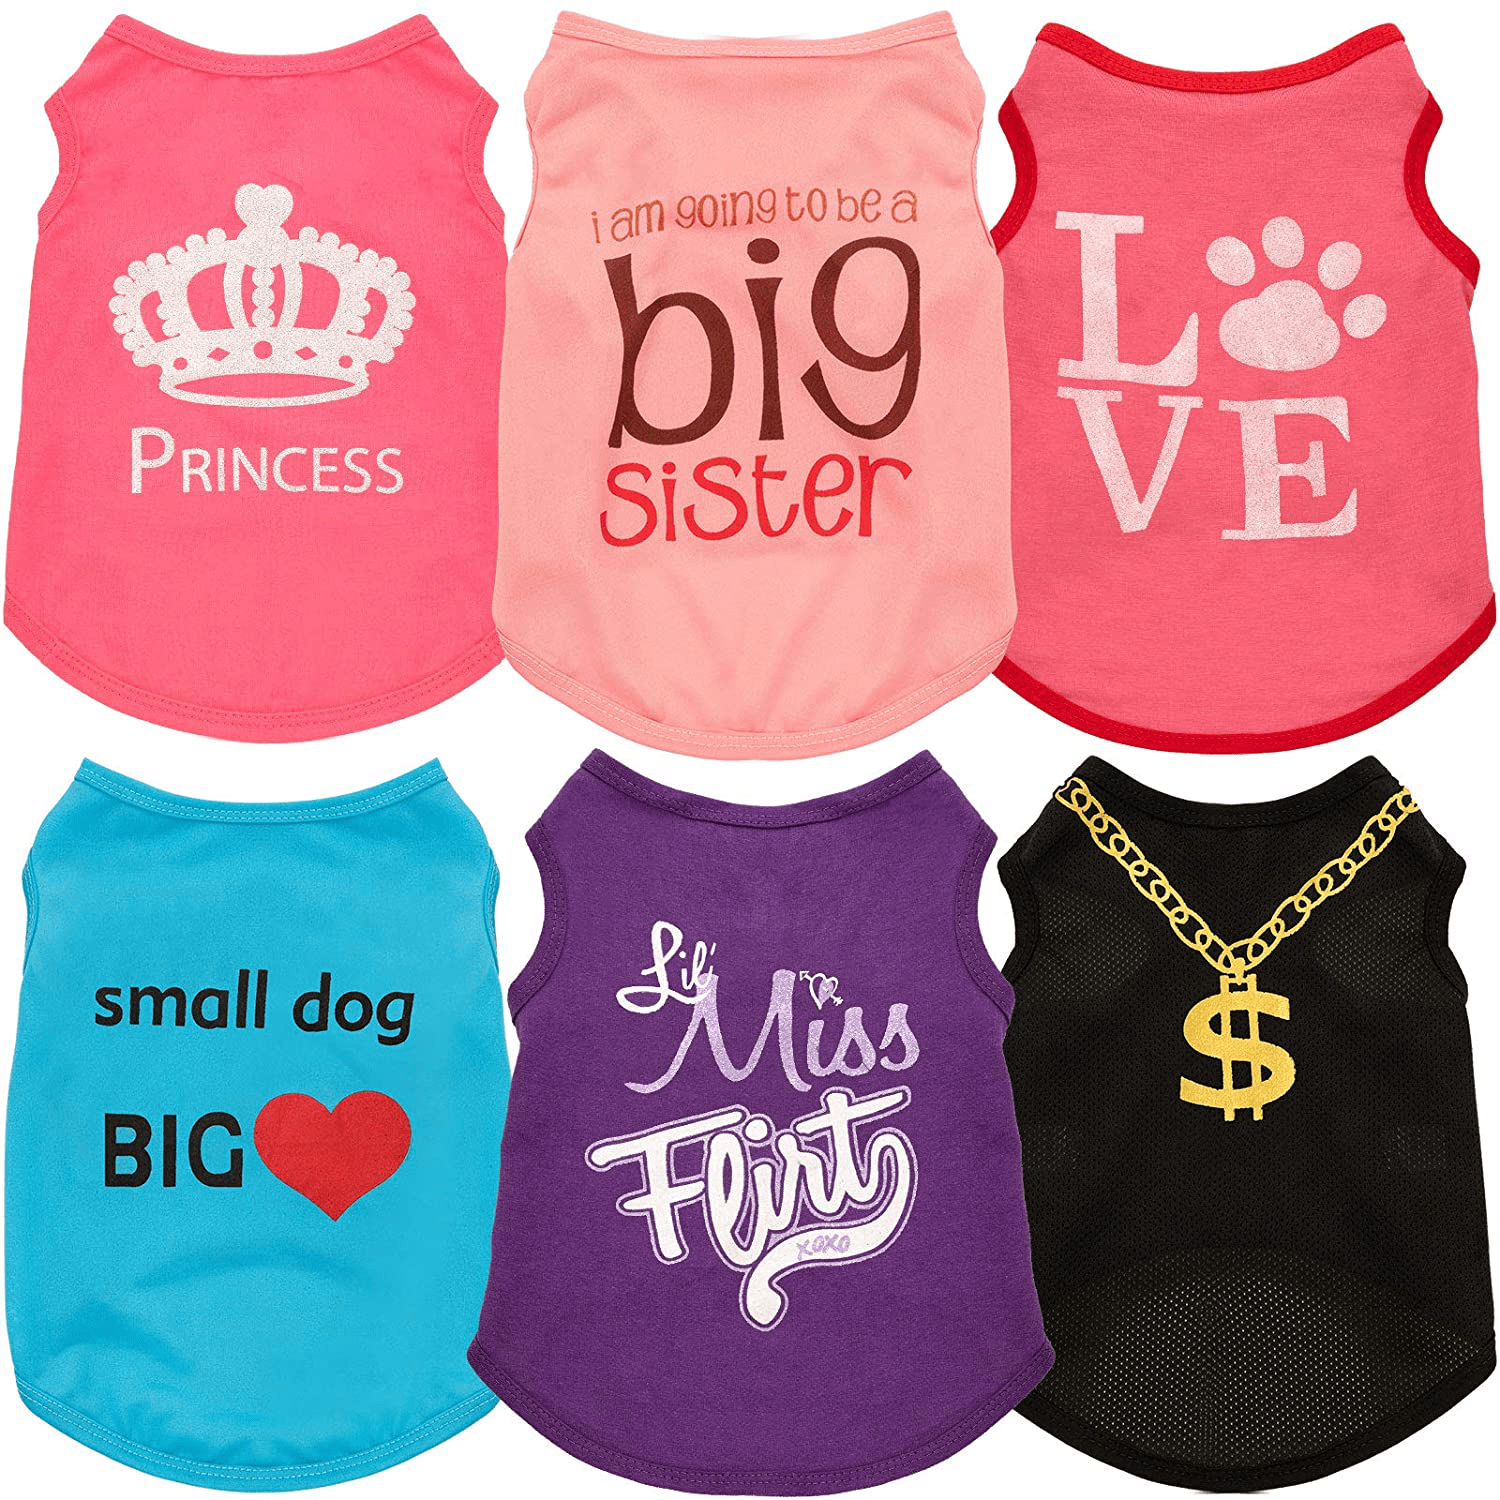 6 Pieces Pet Dog Shirts Soft Puppy Vest Dog Sweatshirt Pet Dog Cat Clothes for Chihuahua Yorkshire Terrier Small to Medium Dogs Cats (S)